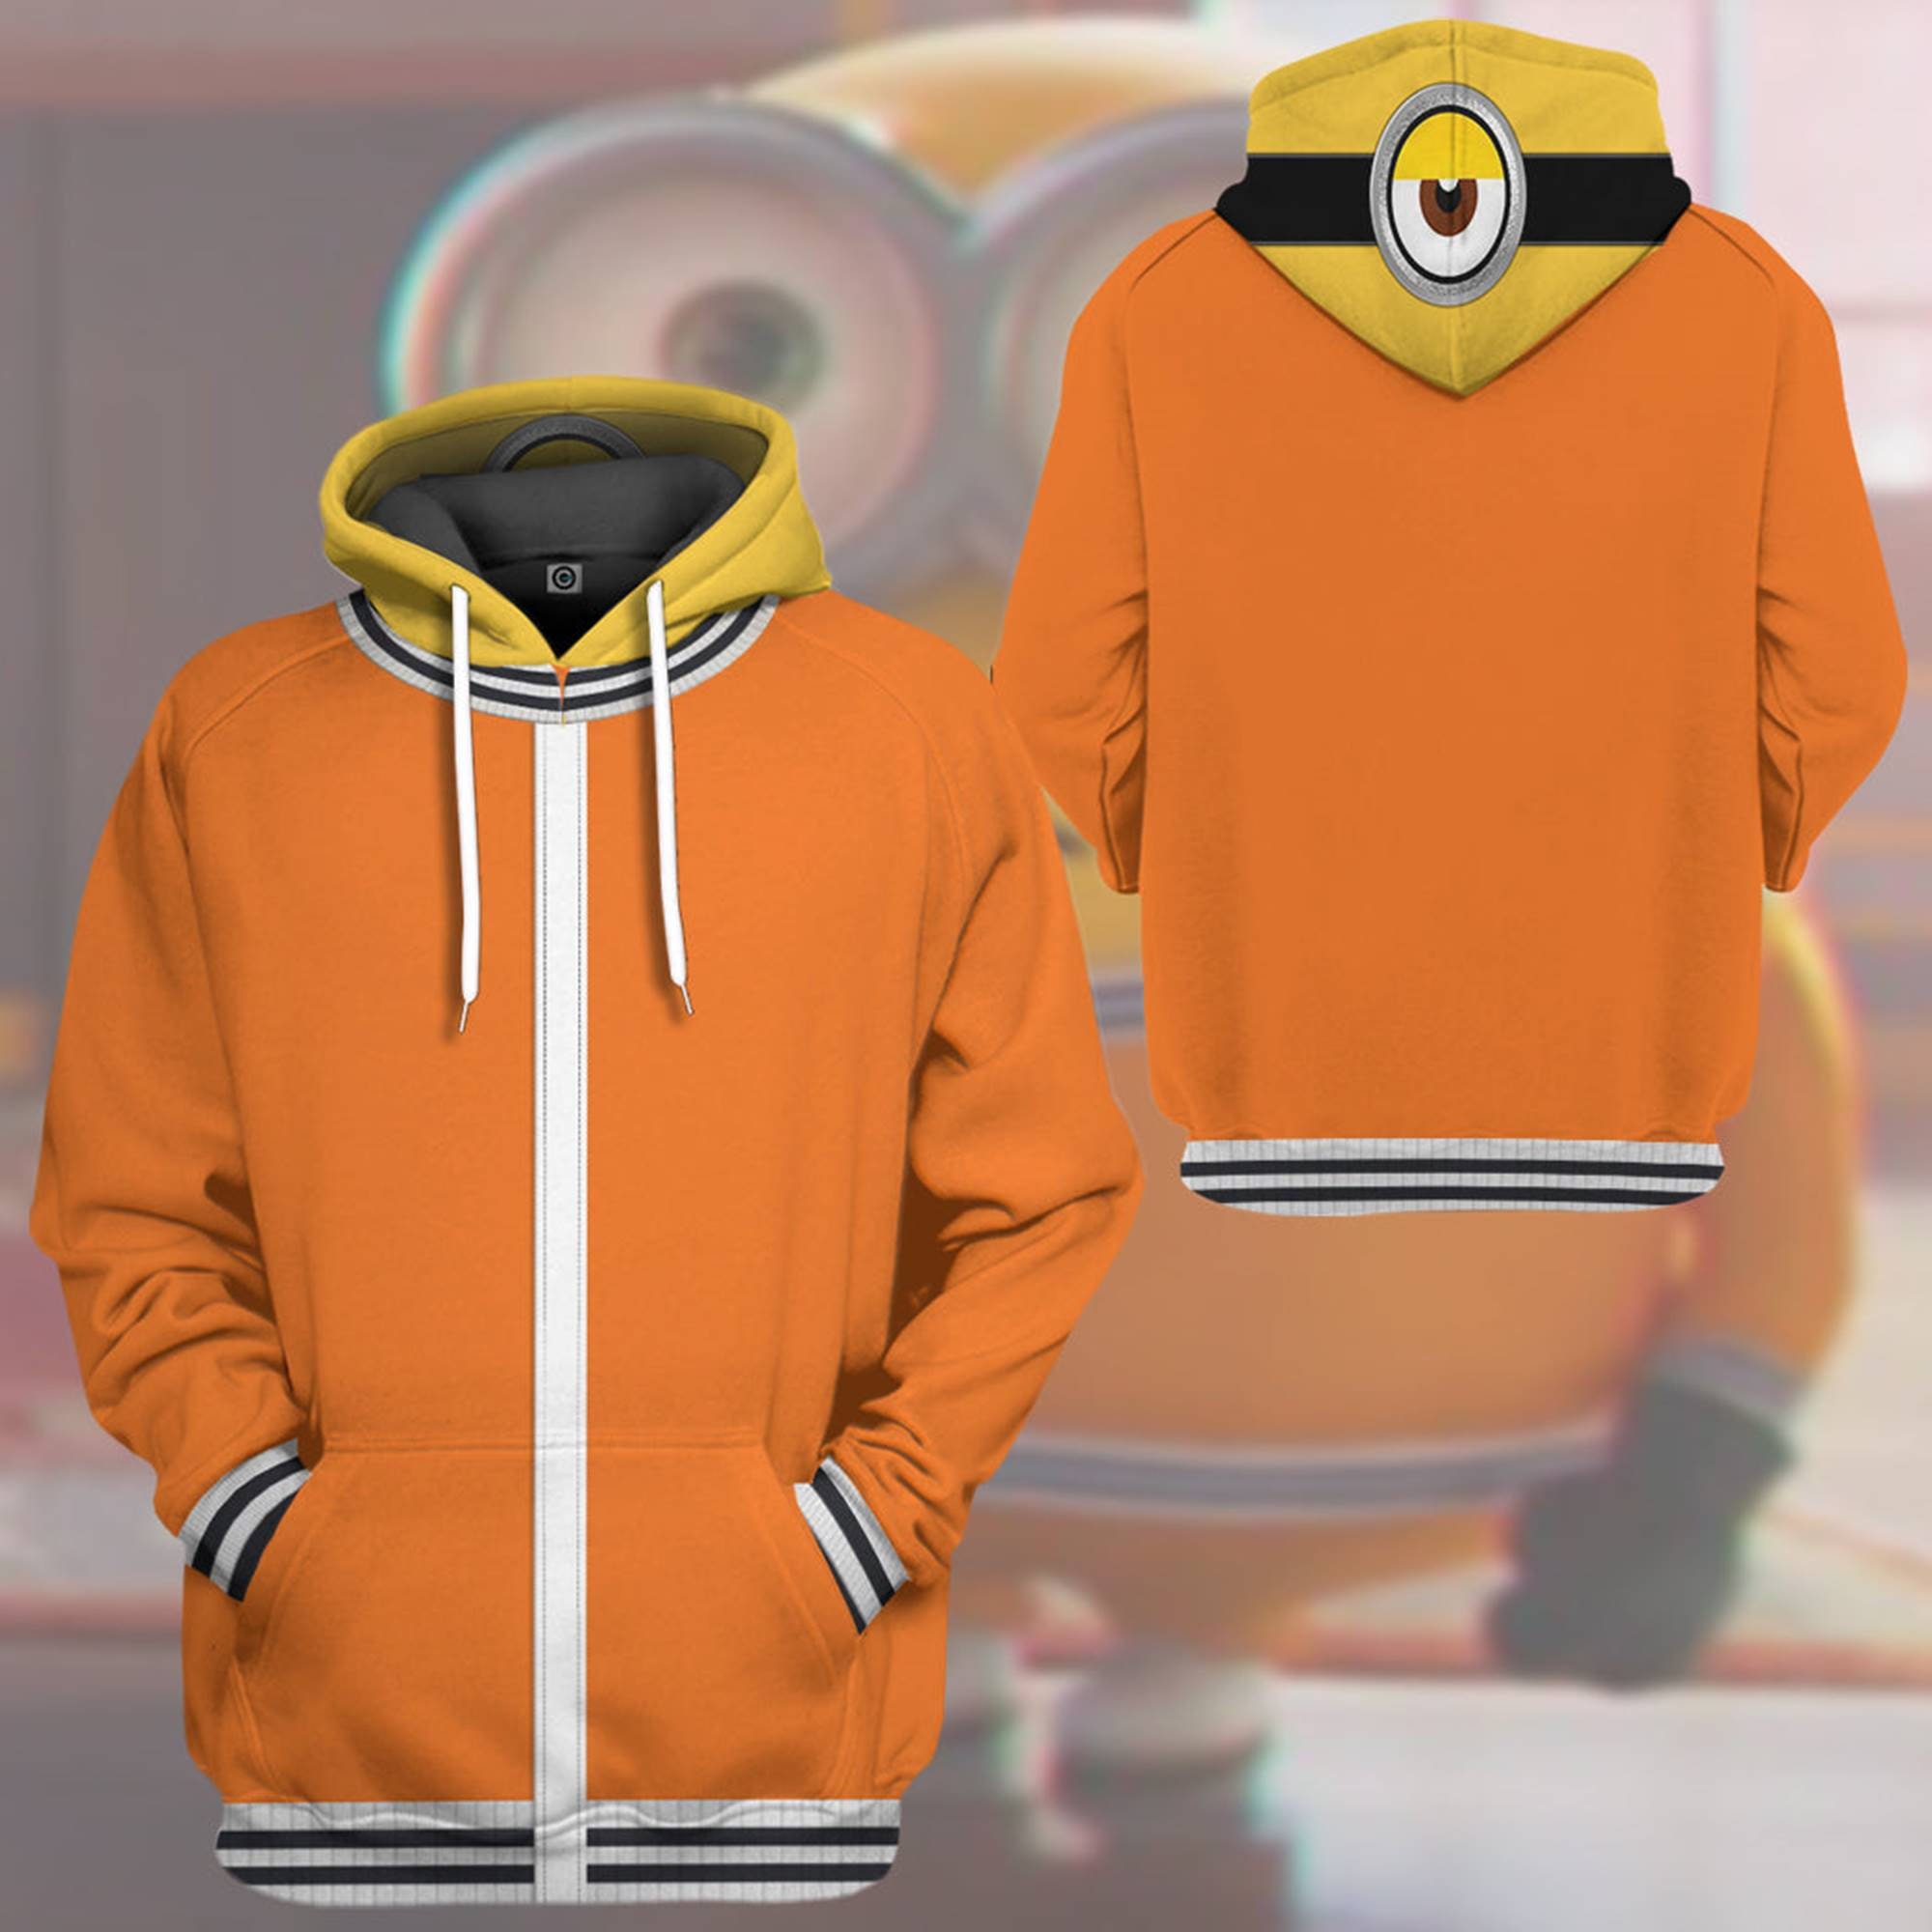 Discover Minions Bob Orange Full Over Print 3D Hoodie | Minions Cosplay Shirt | Despicable Me Minions The Rise of Gru Sudadera con Capucha 3D Unisex